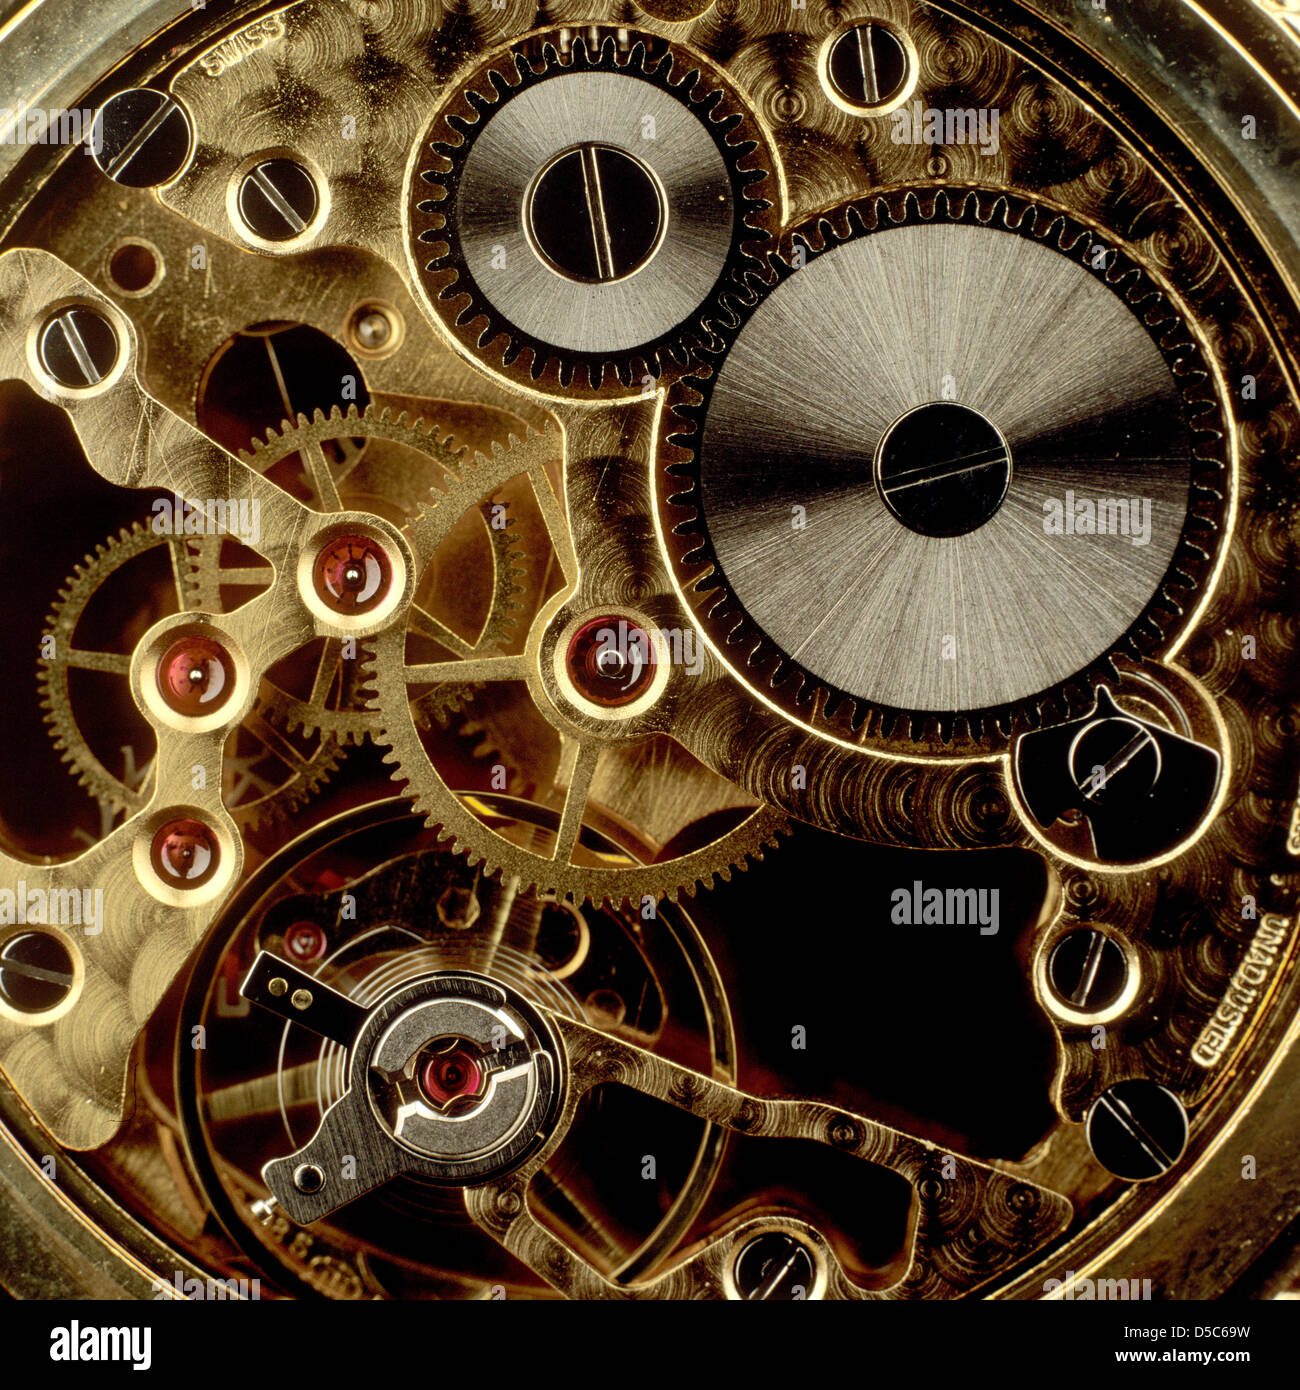 Cogs in a watch mechanism, close-up Stock Photo